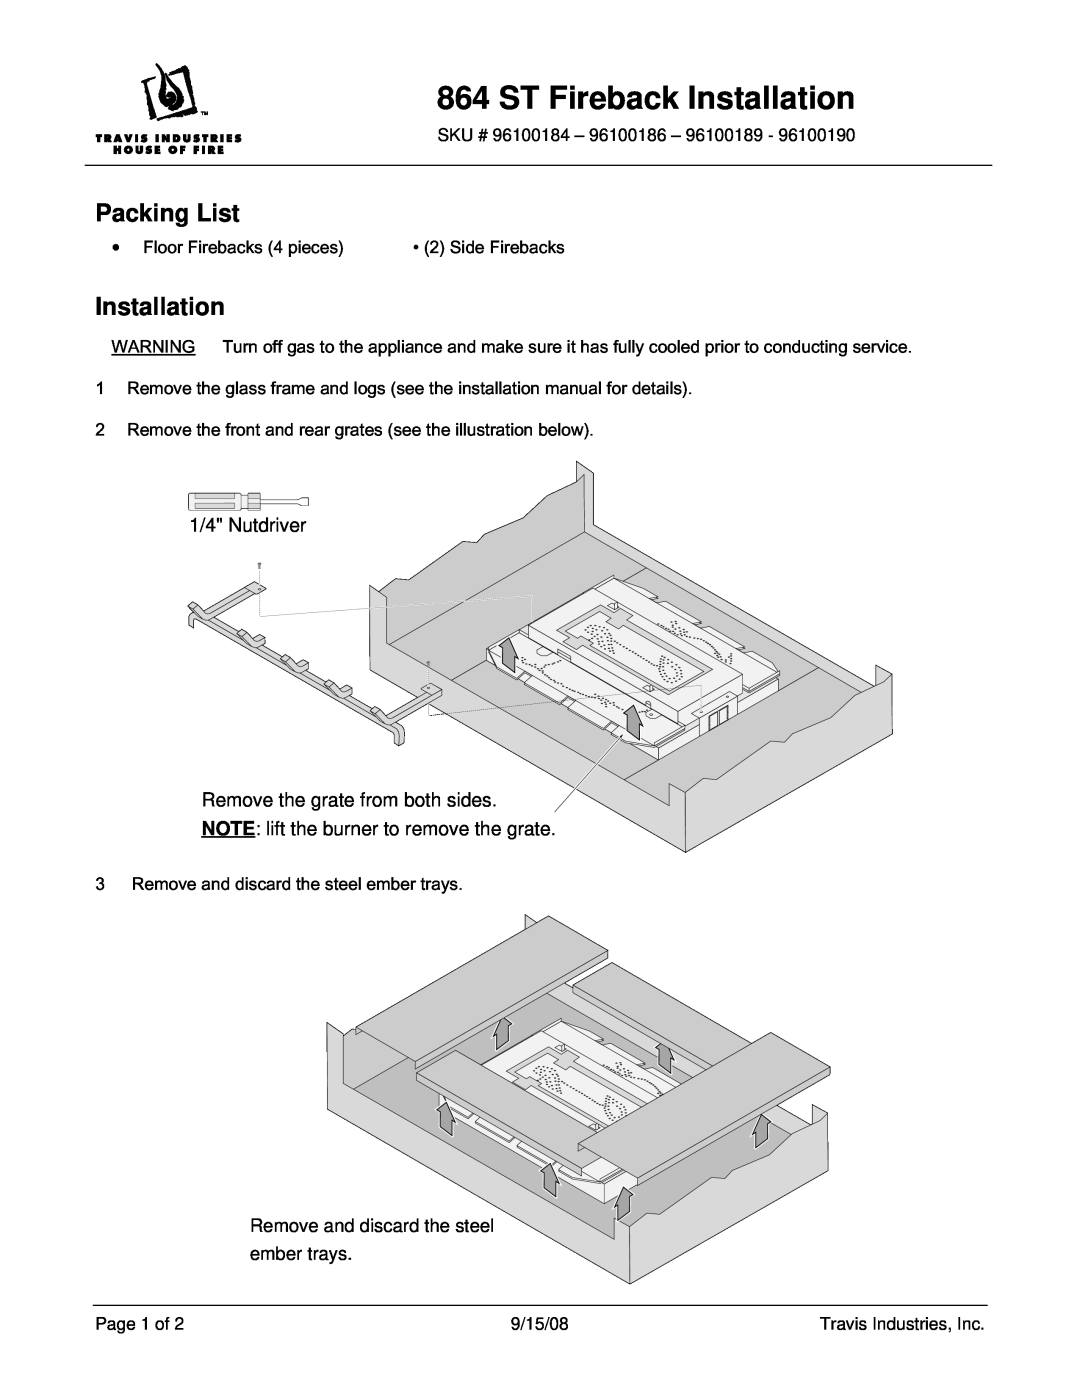 Avalon Stoves 864 installation manual ST Fireback Installation, Packing List, NOTE lift the burner to remove the grate 